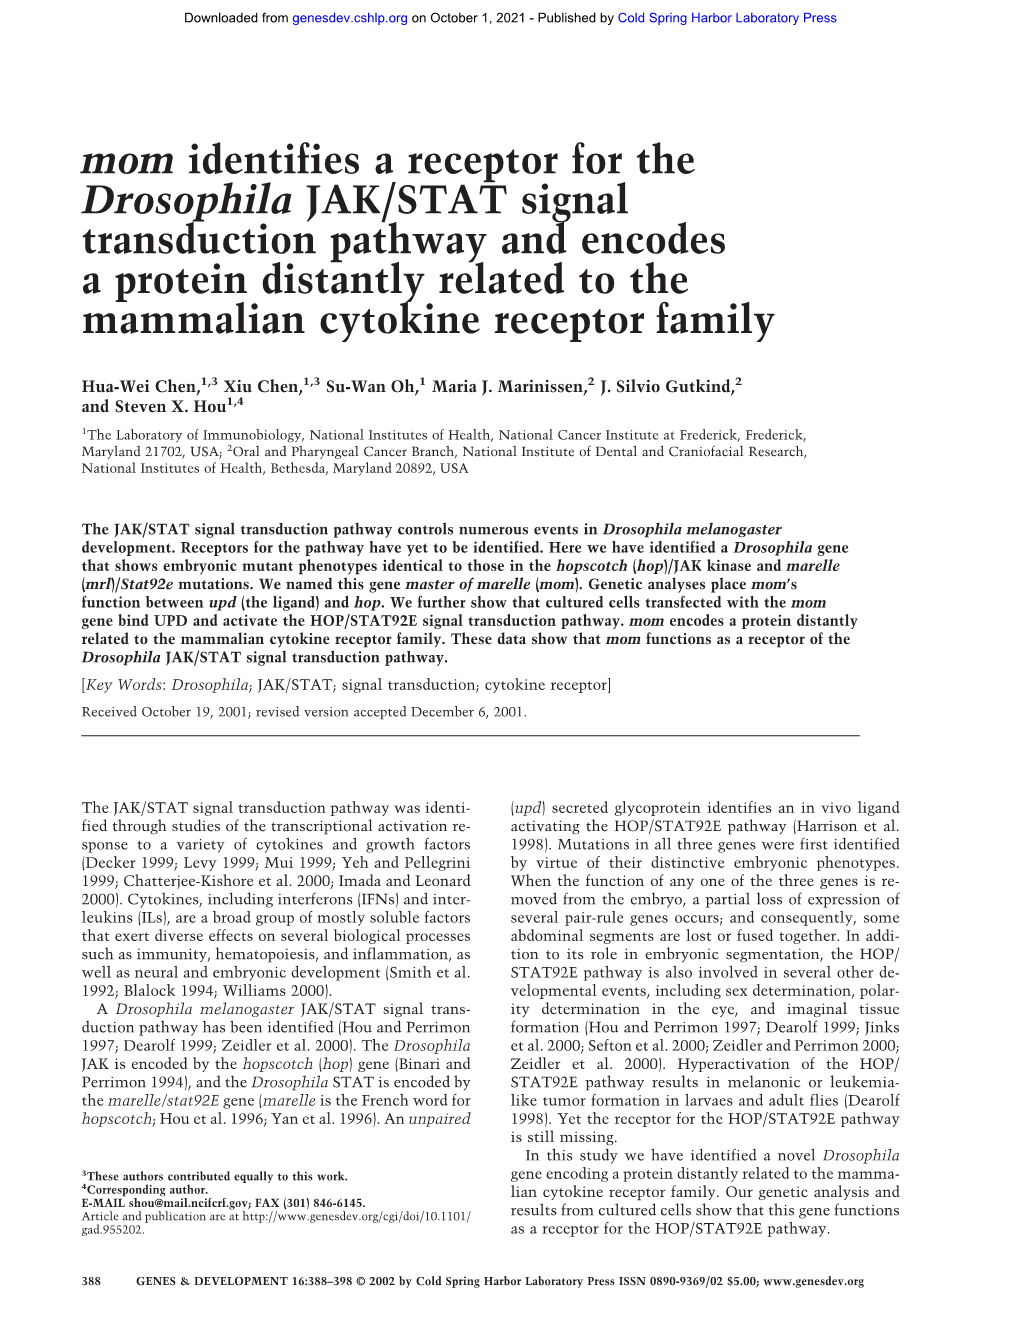 Mom Identifies a Receptor for the Drosophila JAK/STAT Signal Transduction Pathway and Encodes a Protein Distantly Related to the Mammalian Cytokine Receptor Family